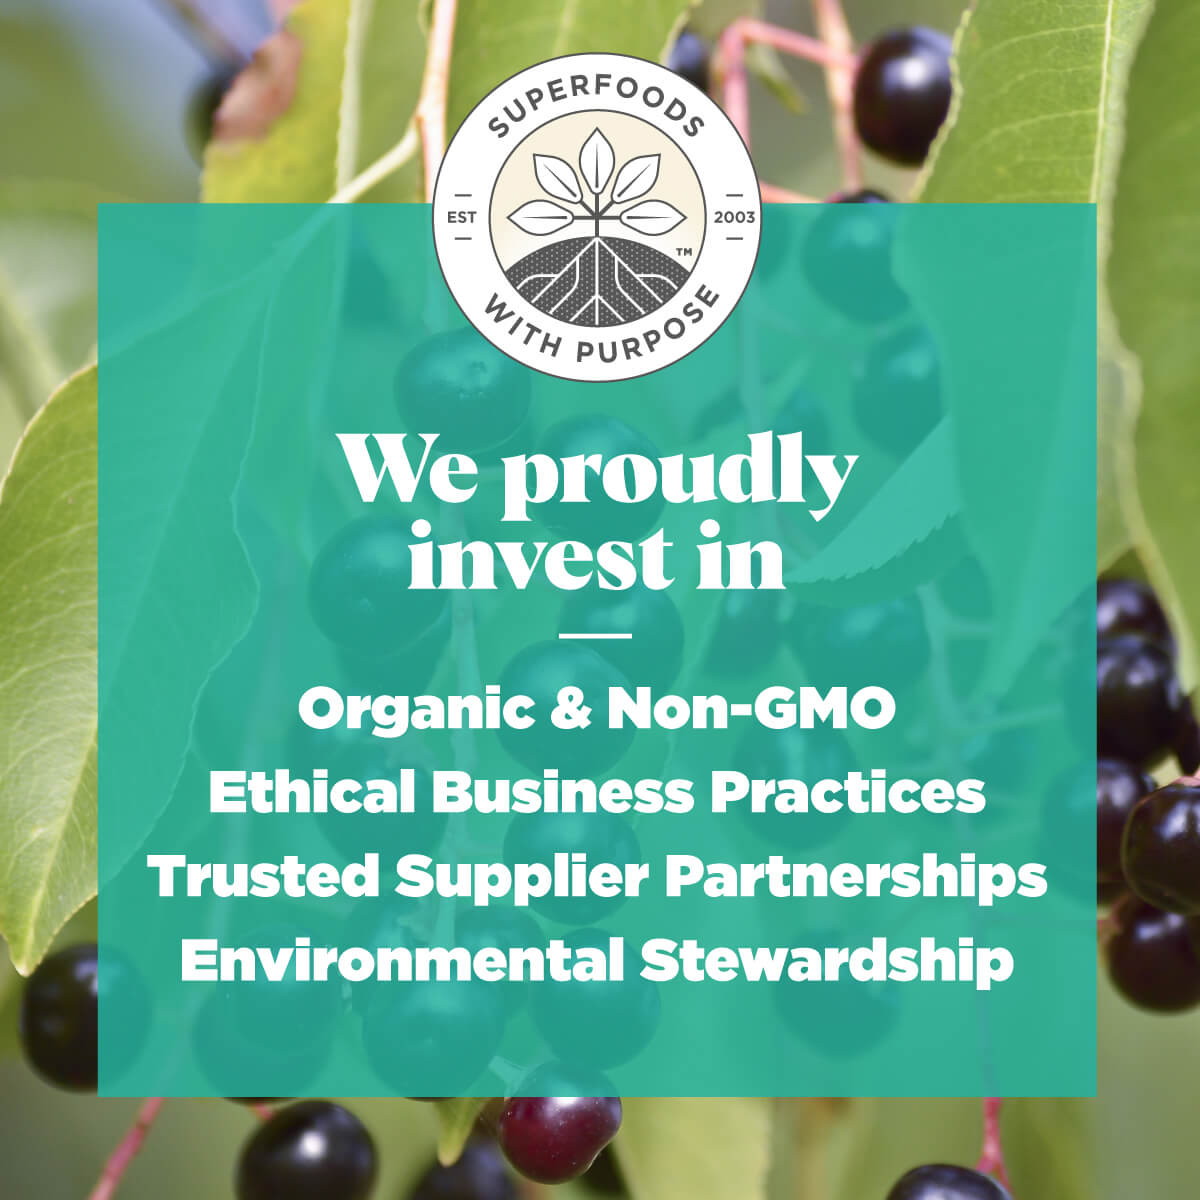 Navitas Organics proudly invests in organic, non-GMO, ethical business practices, trusted supplier partnerships, and environmental stewardship.